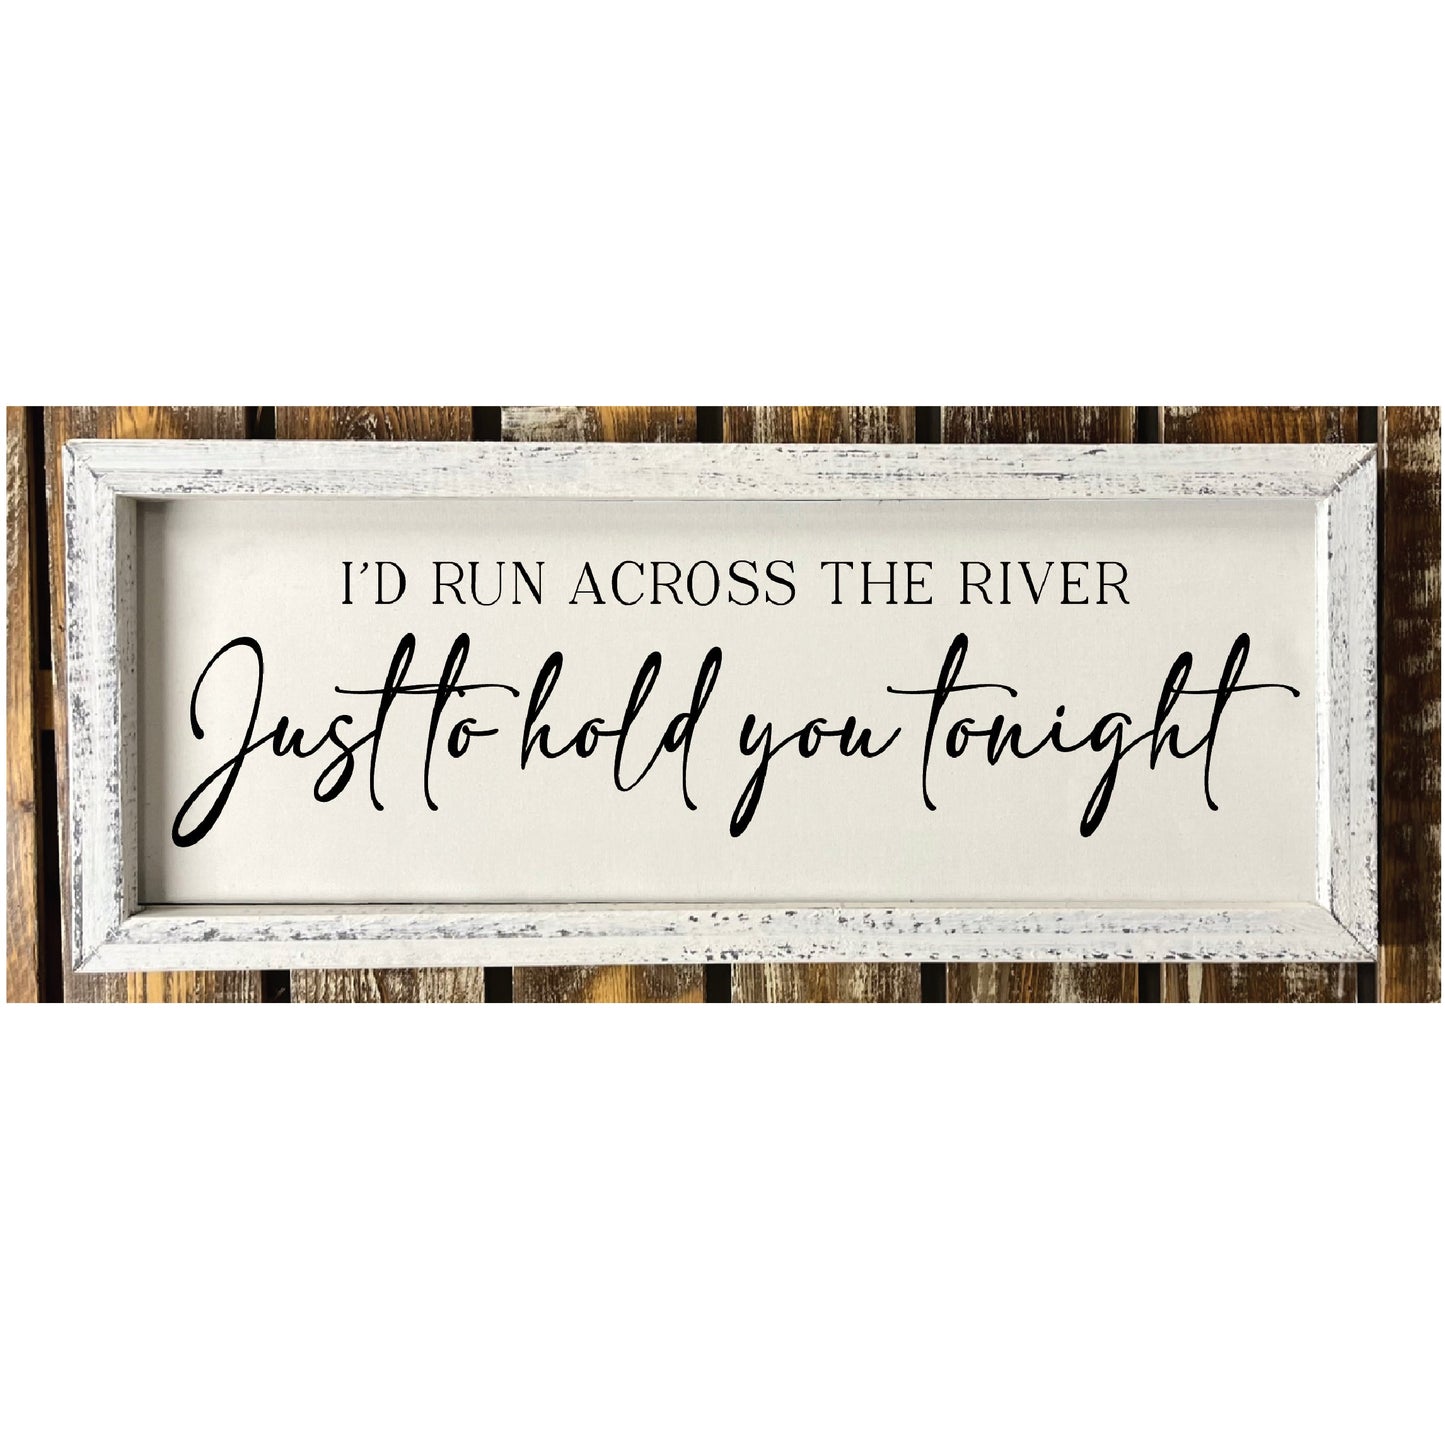 I'd Run Across the River to Hold You Tonight